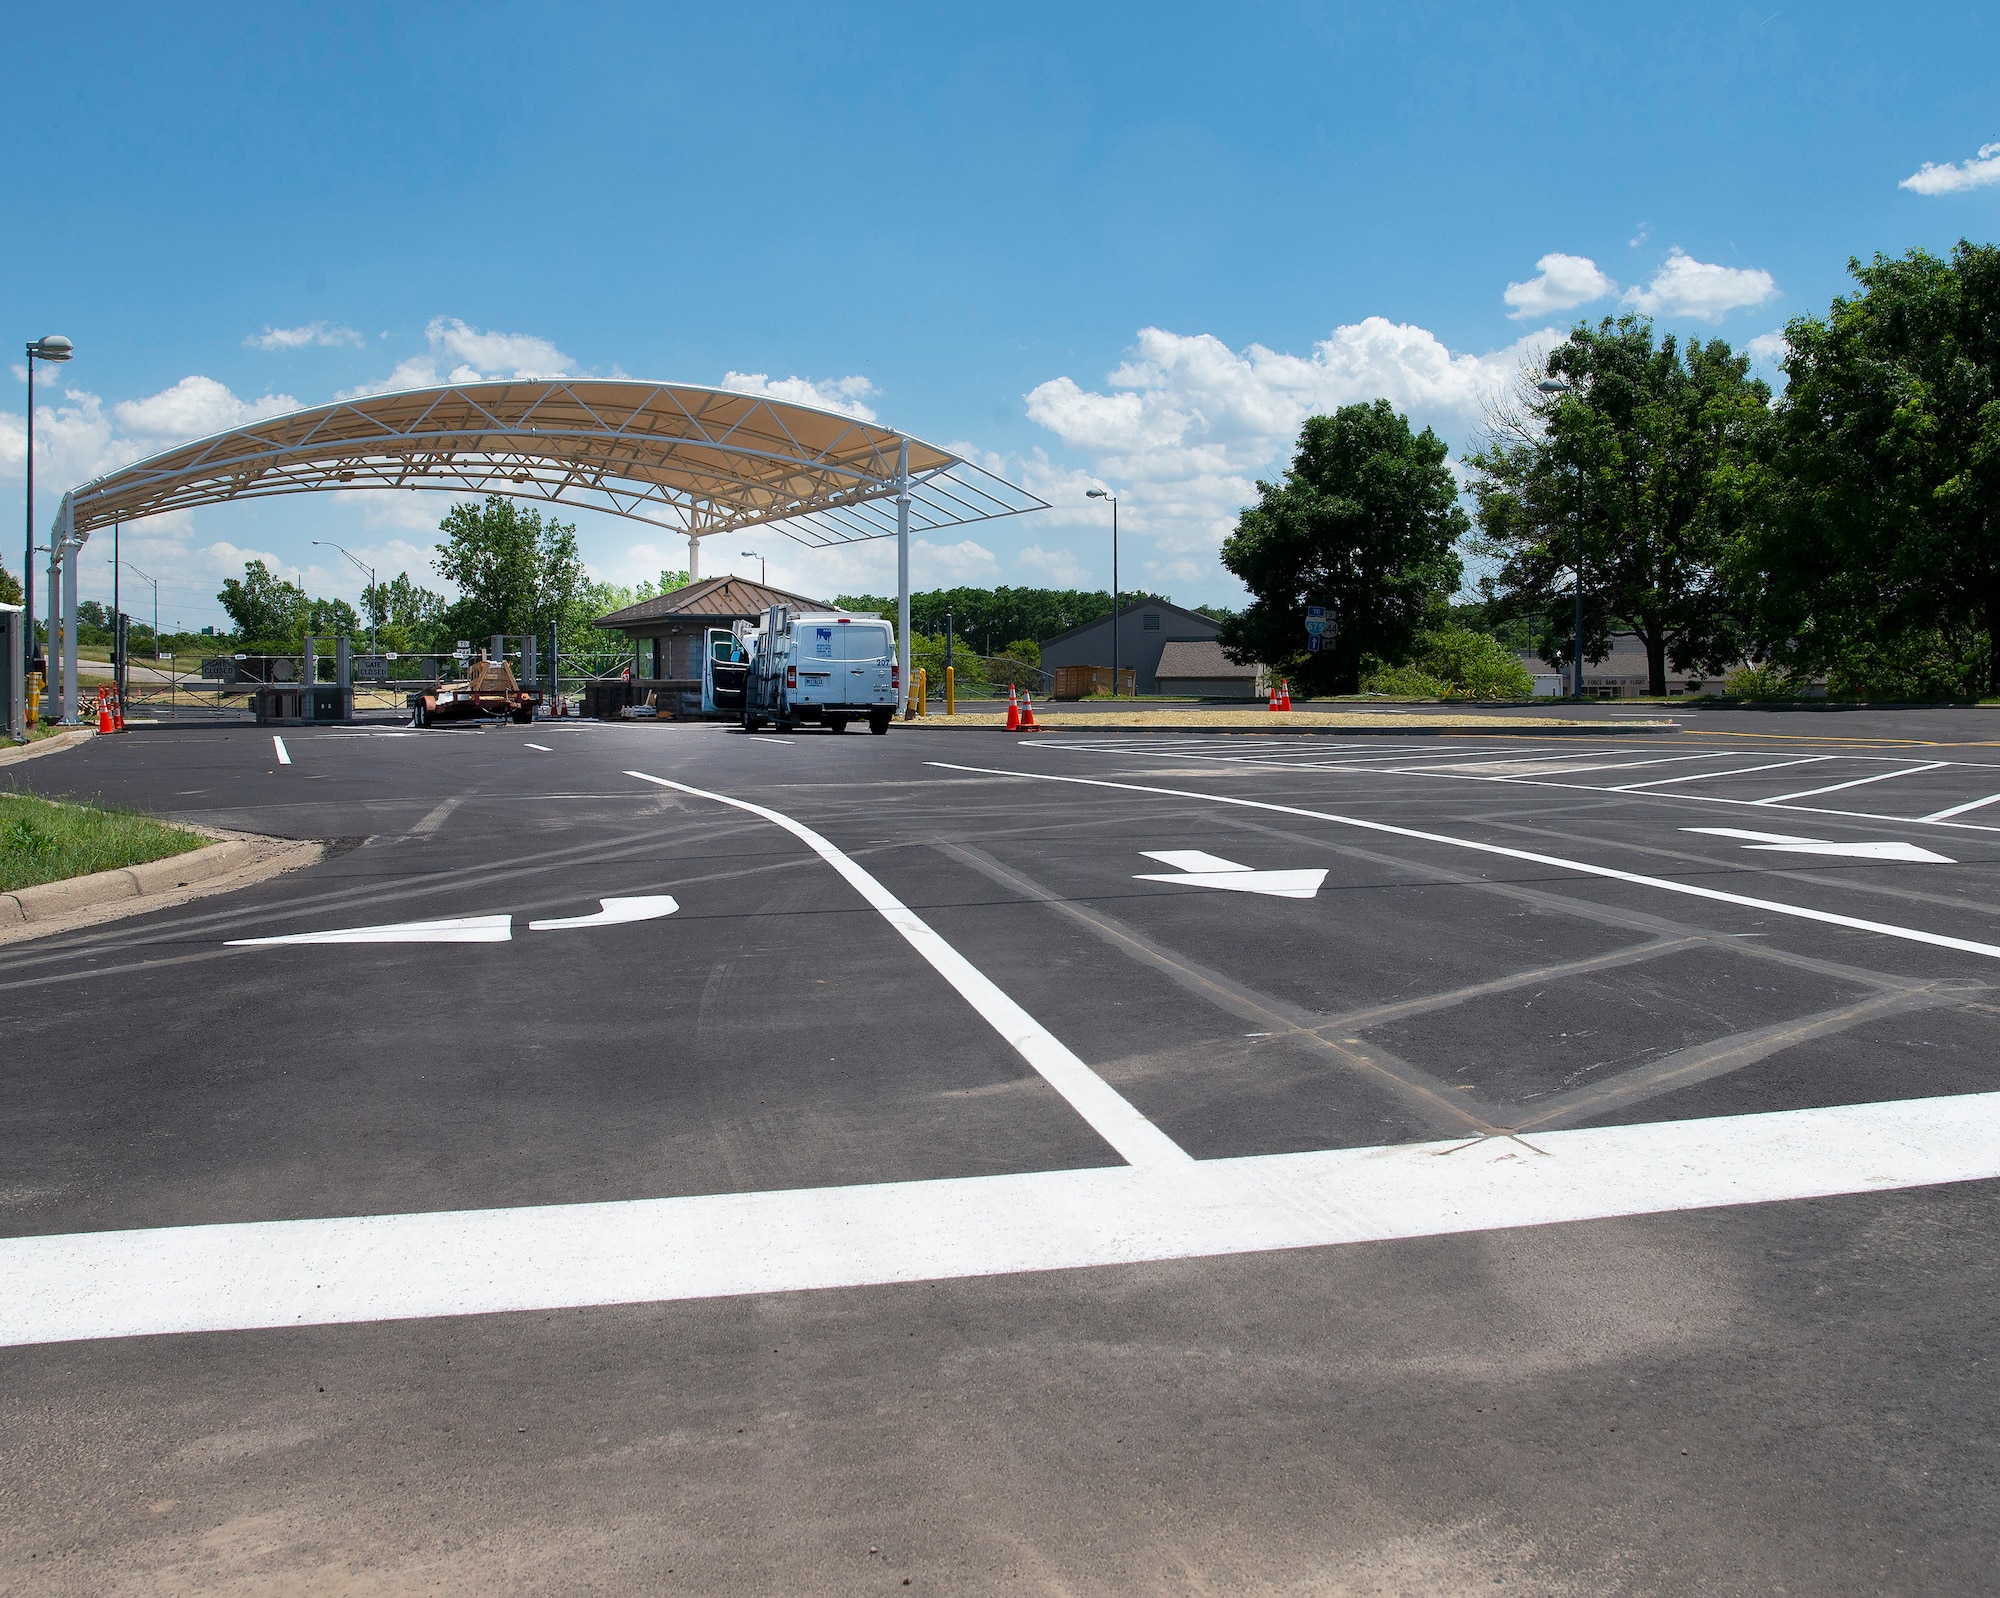 Freshly painted lanes are seen June 14 on the inbound lanes of Gate 15A at Wright-Patterson Air Force Base in preparation of its reopening Monday. (U.S. Air Force photo by R.J. Oriez)